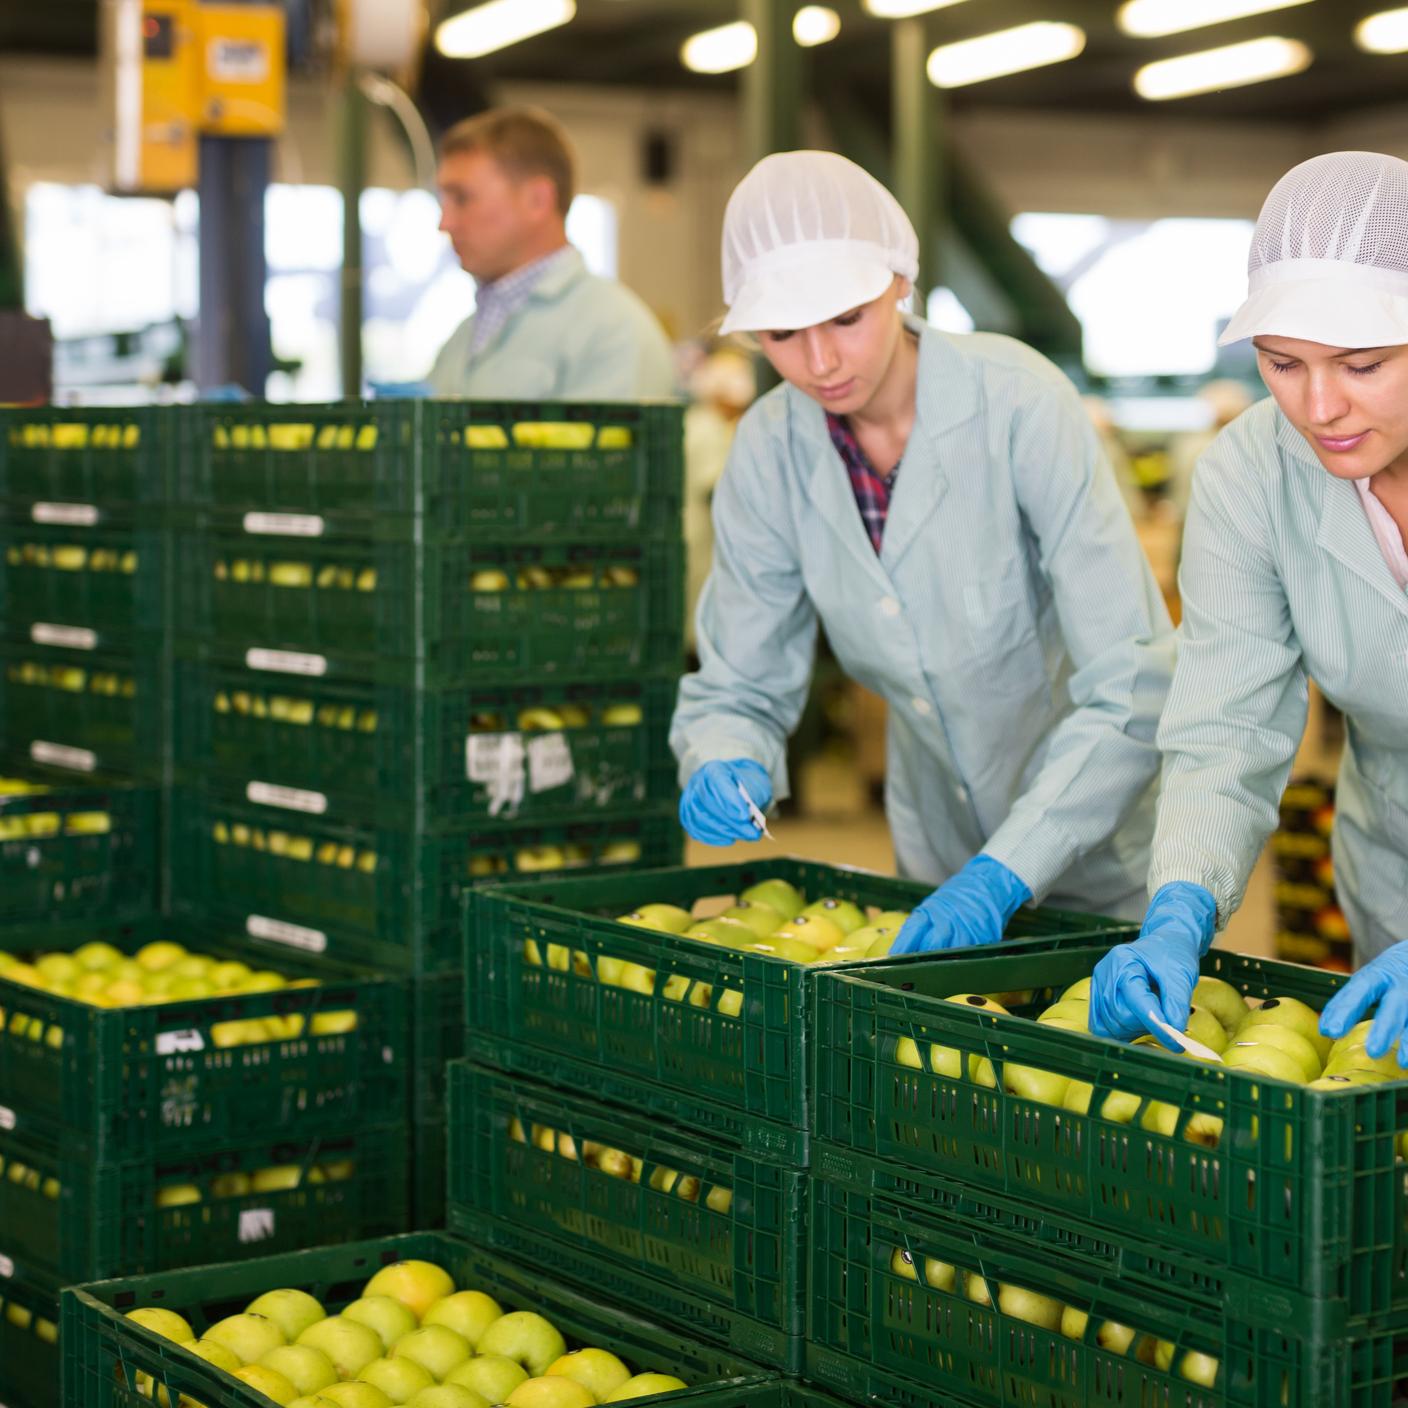 Female workers in uniform sticking labels on fresh apples at factory